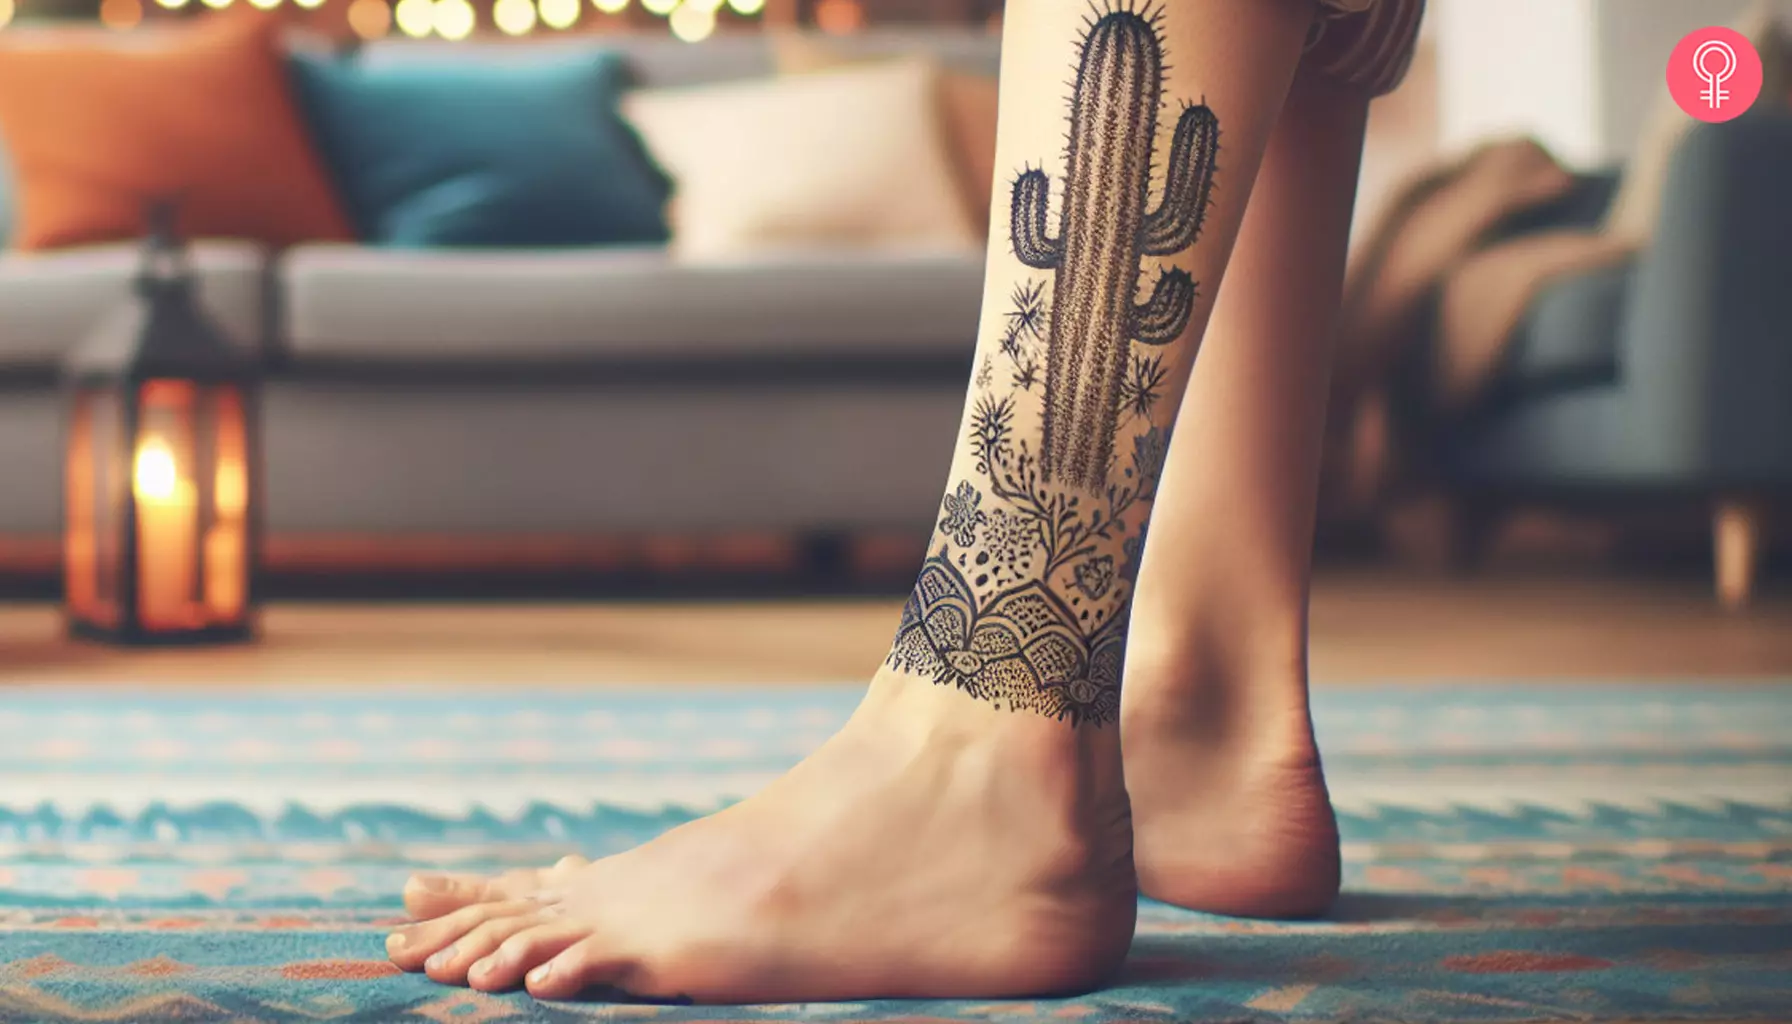 Western calf tattoo for women featuring a cactus